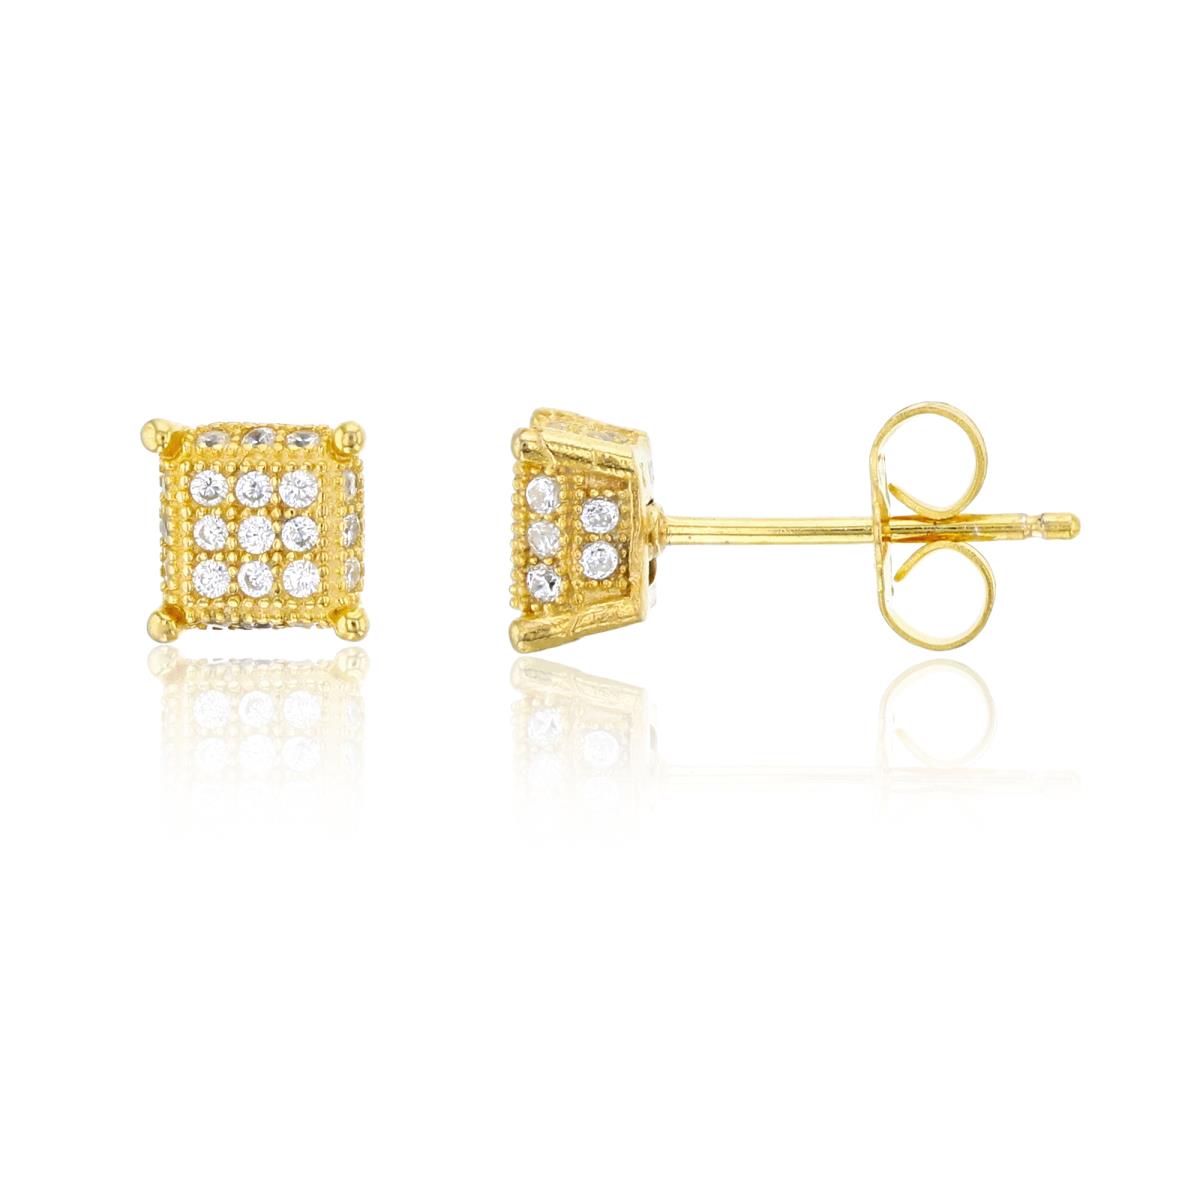 Sterling Silver Yellow 6.4x6.4mm Micropave 3D Square Stud Earring